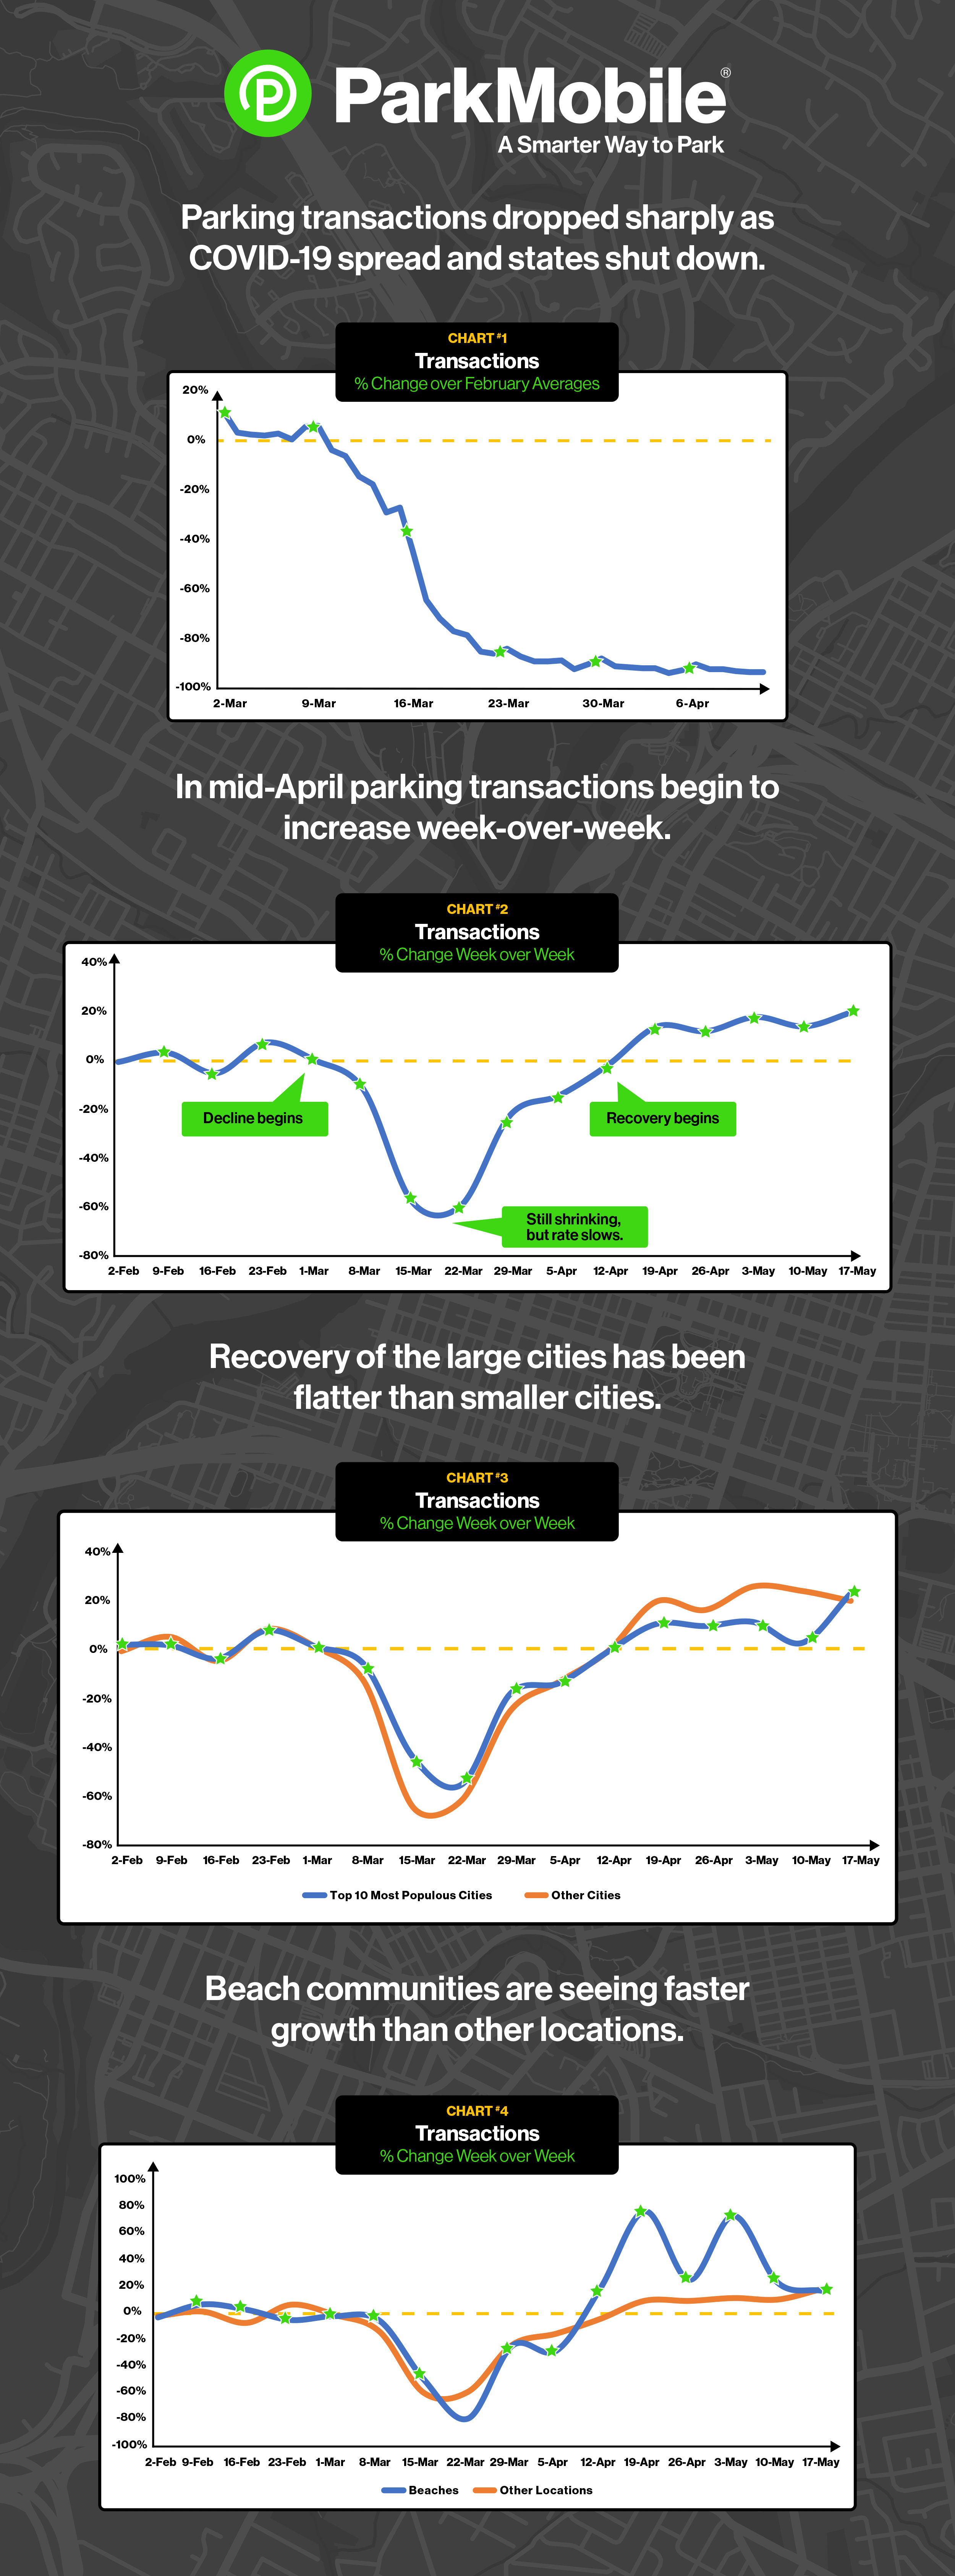 ParkMobile Data Shows a Slow and Steady Comeback in U.S. Cities 5